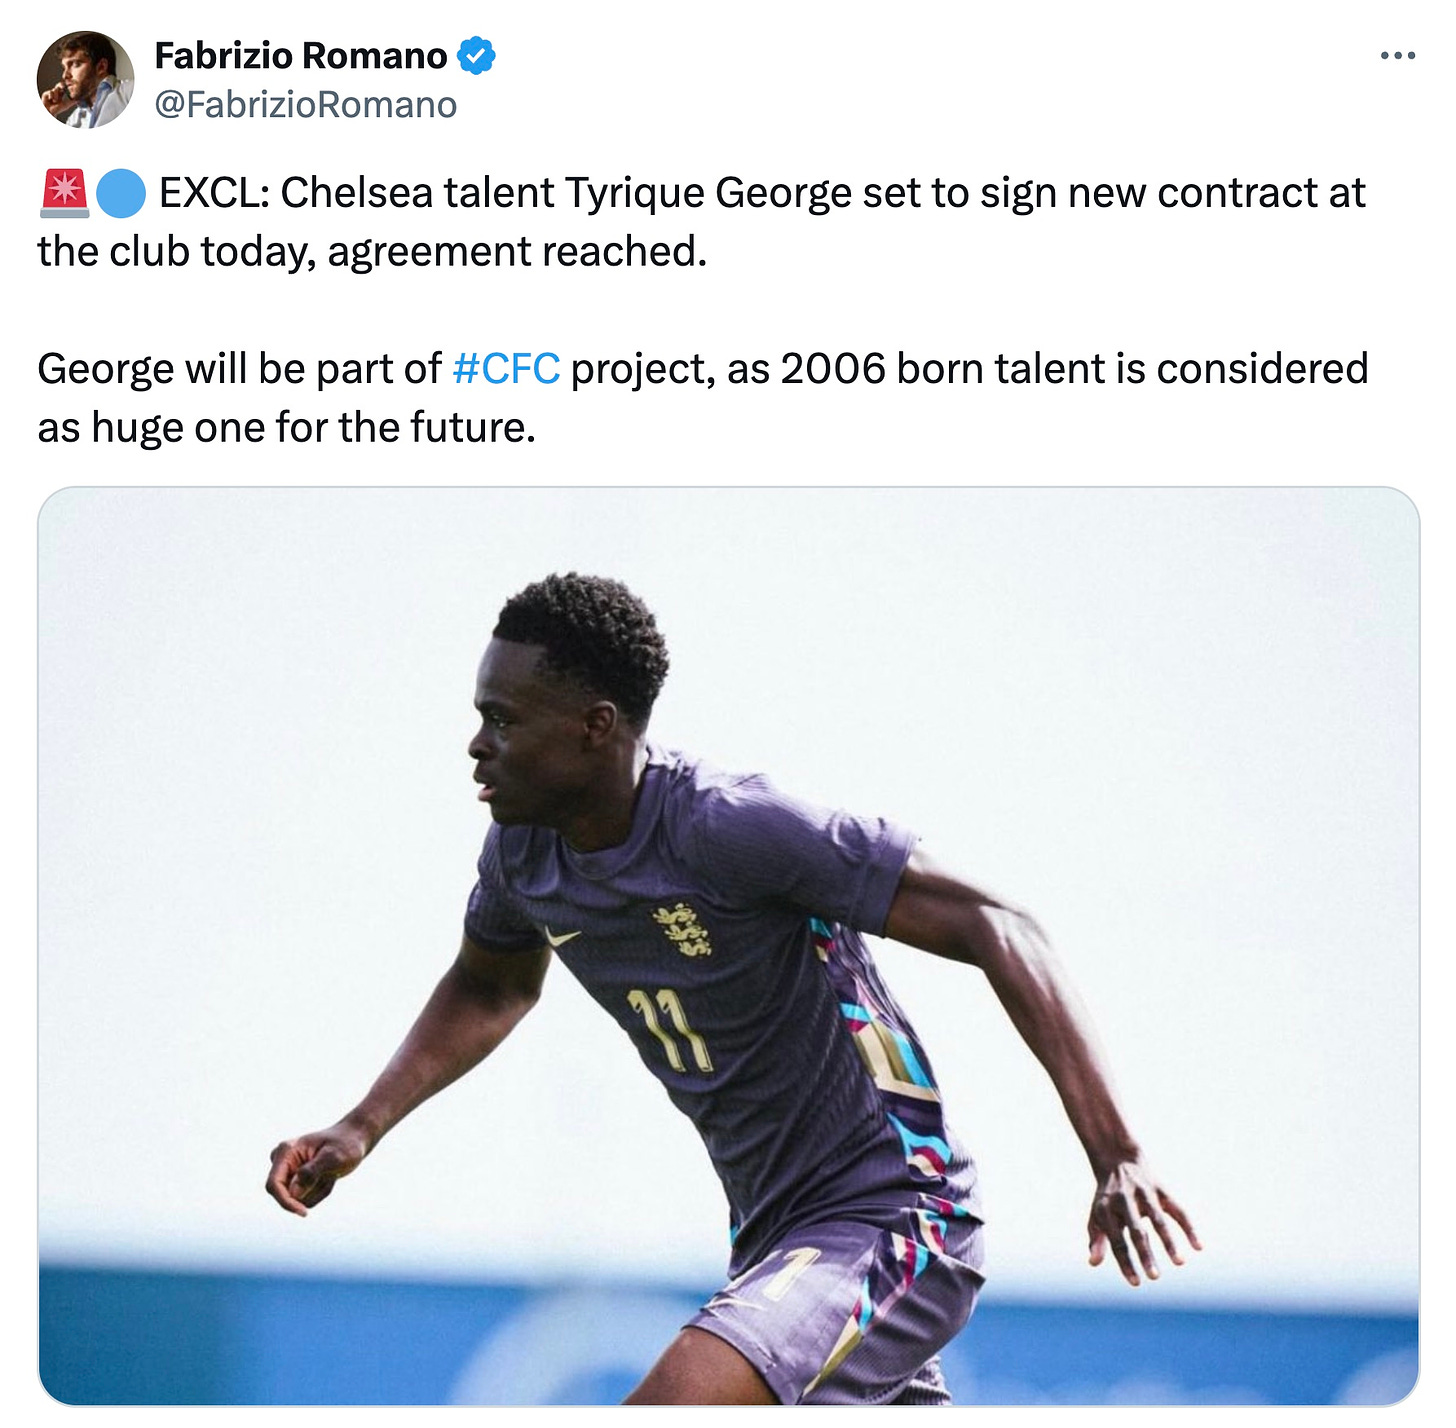 A tweet by Fabrizio Romano about Tyrique George